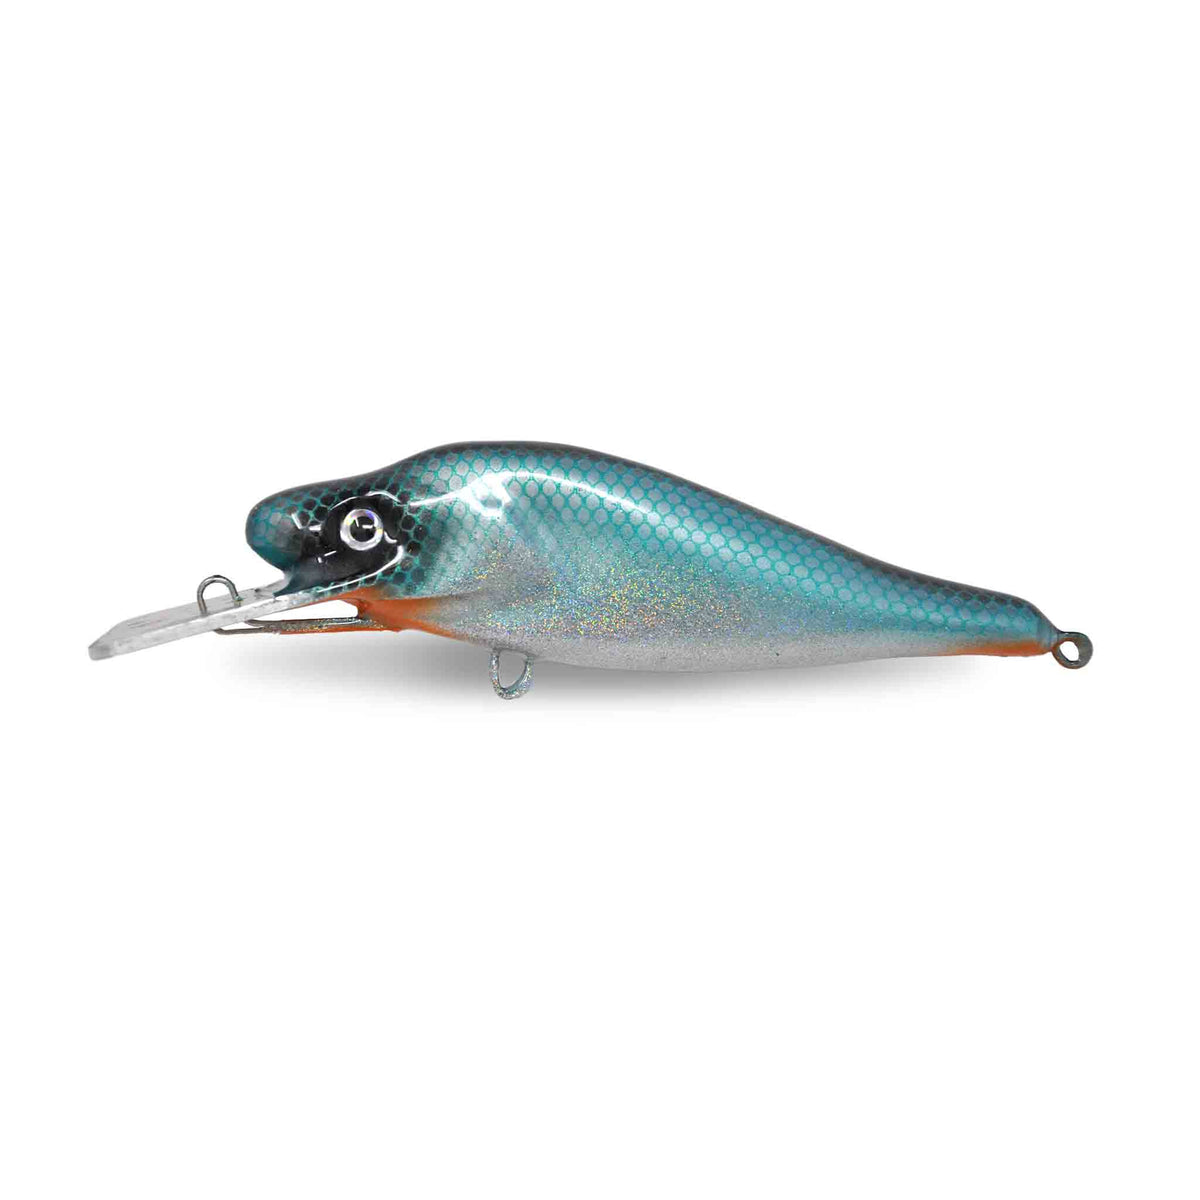 View of Crankbaits Scorpion MadPerch Straight 7.5 Crankbait Shad available at EZOKO Pike and Musky Shop